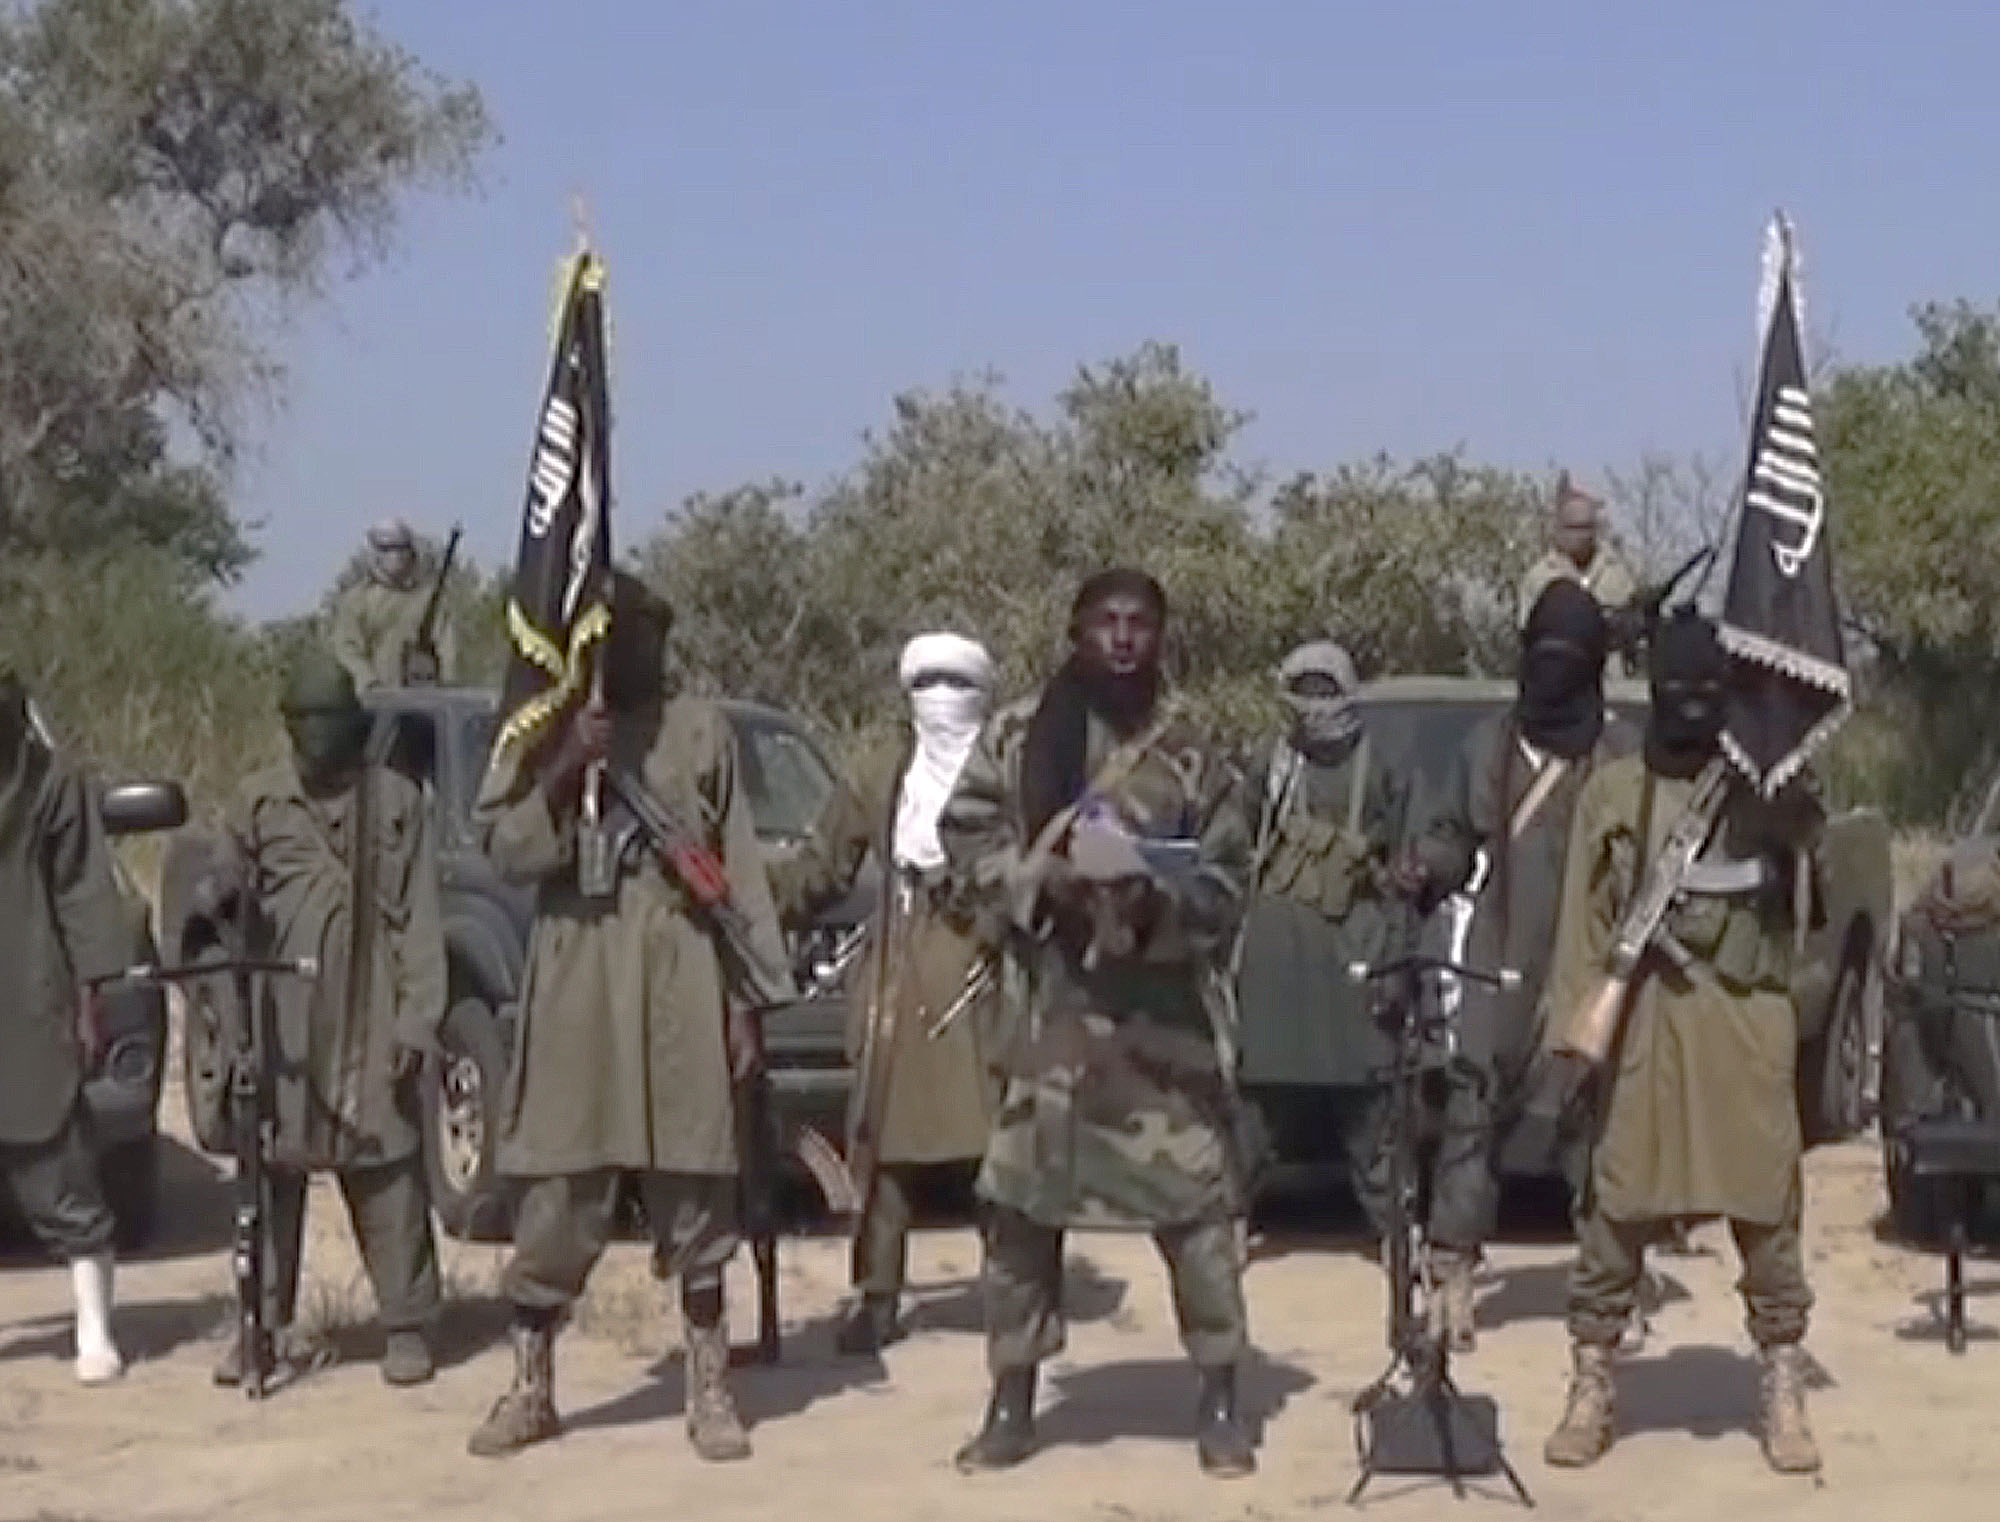 Image taken from a video by Nigeria's Boko Haram terrorist network, Oct. 31, 2014. (AP)